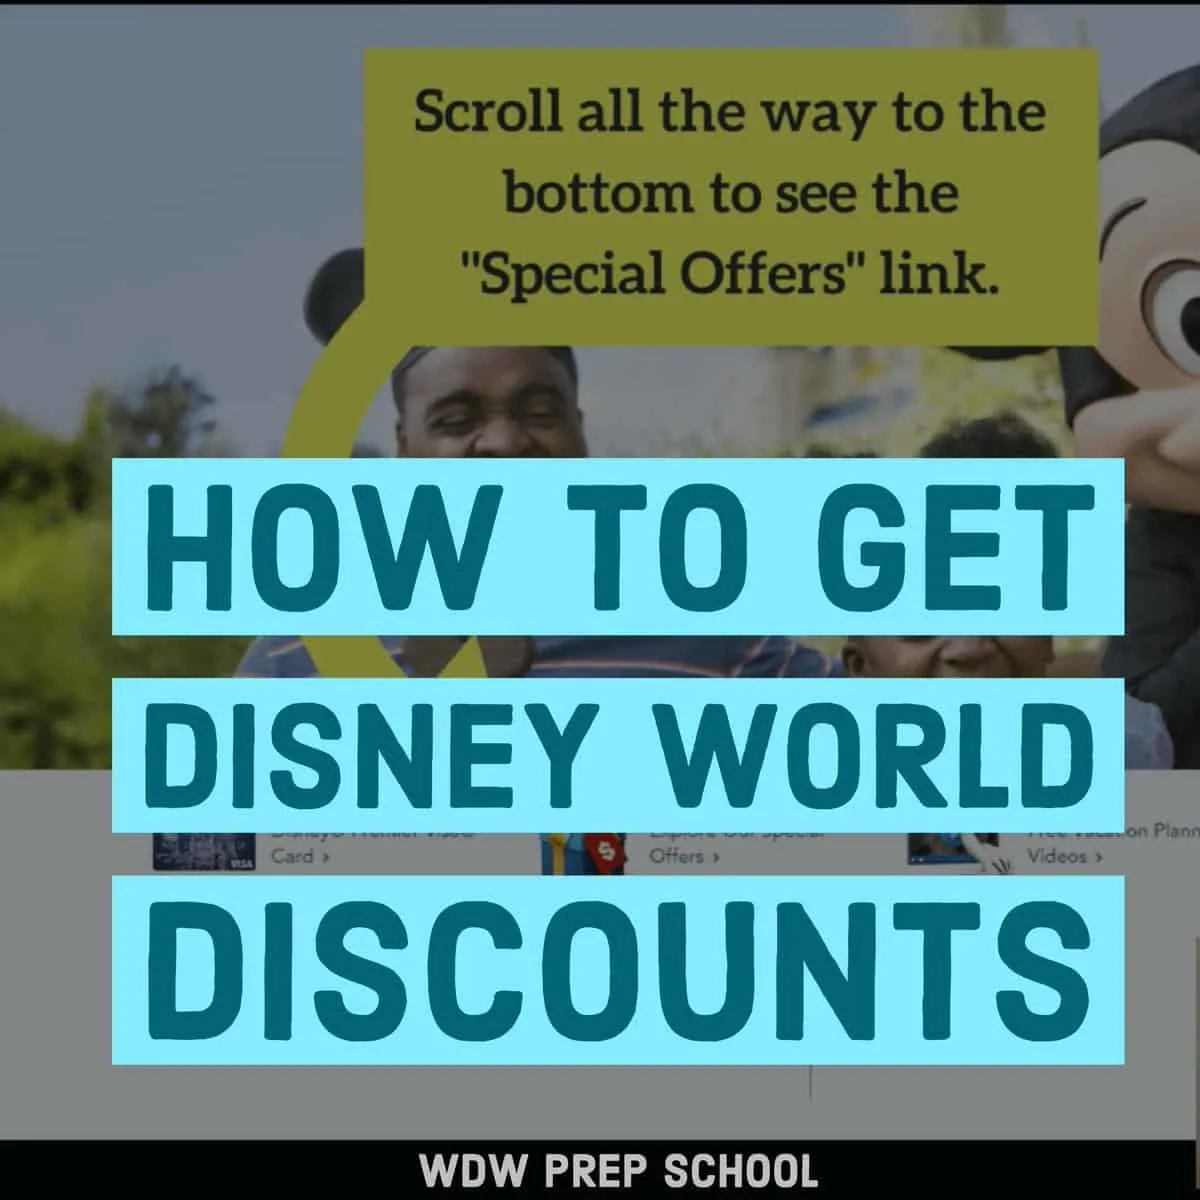 How to get Disney World discounts